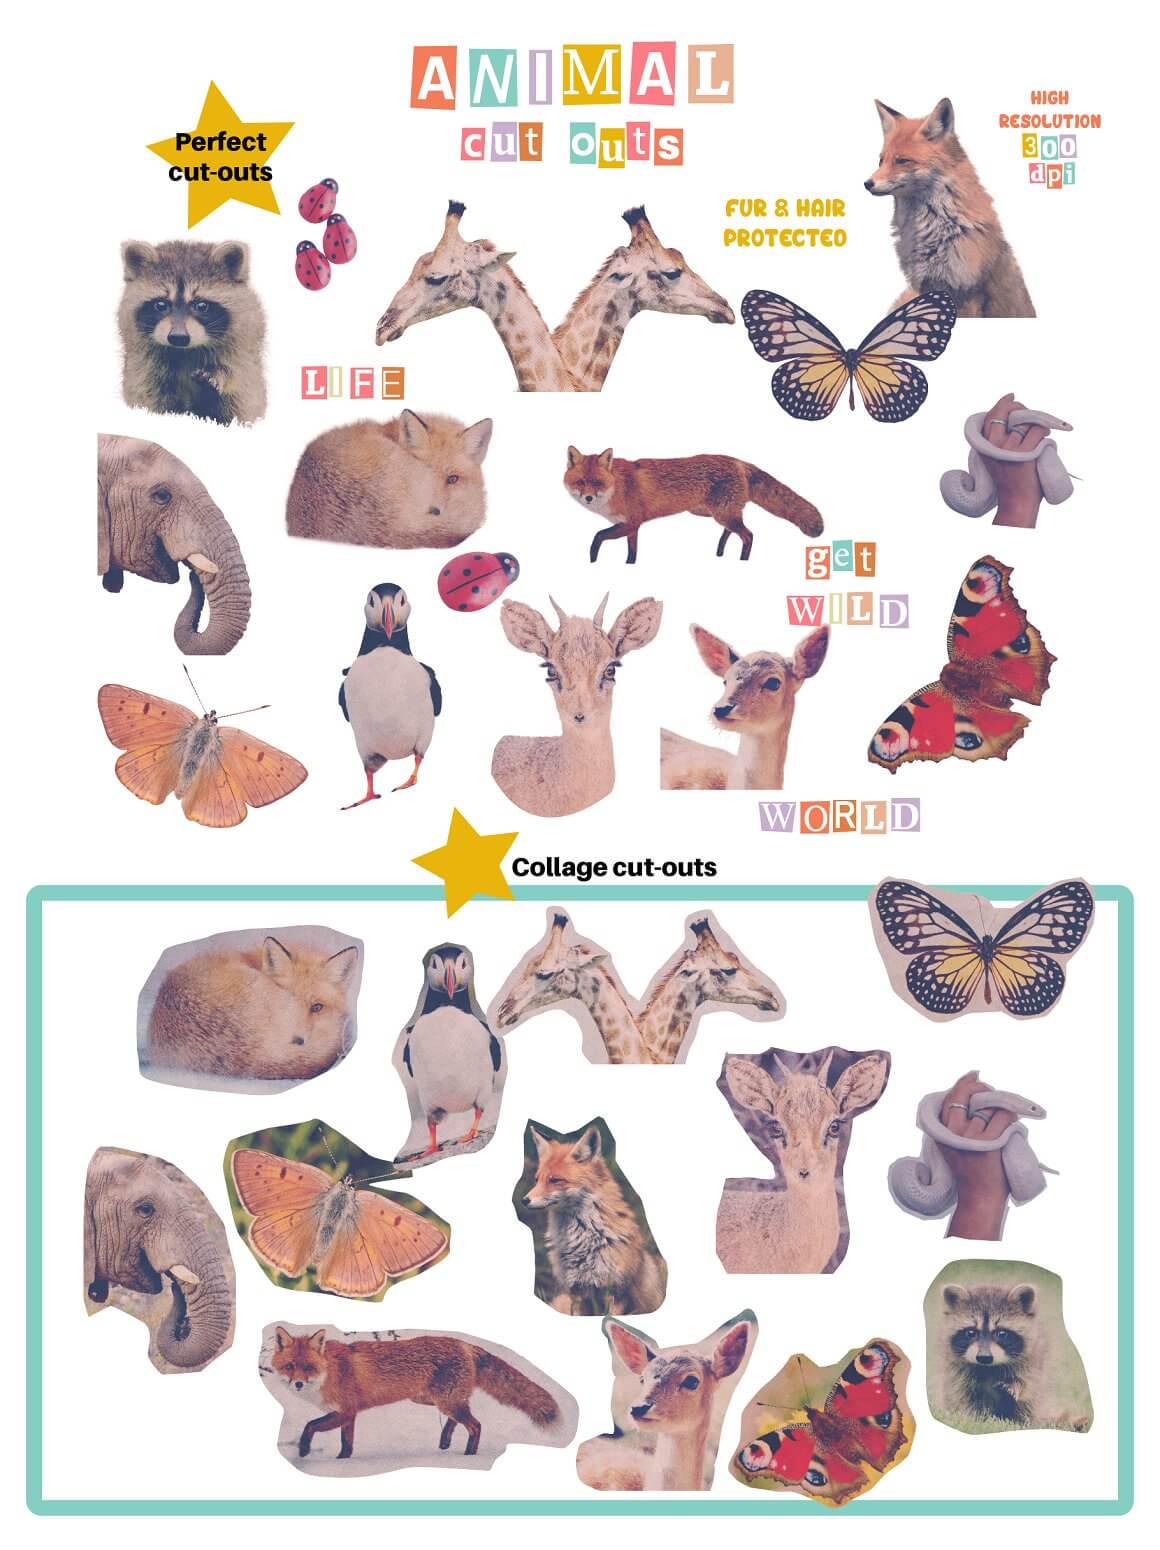 Animals Collage Cut-outs.